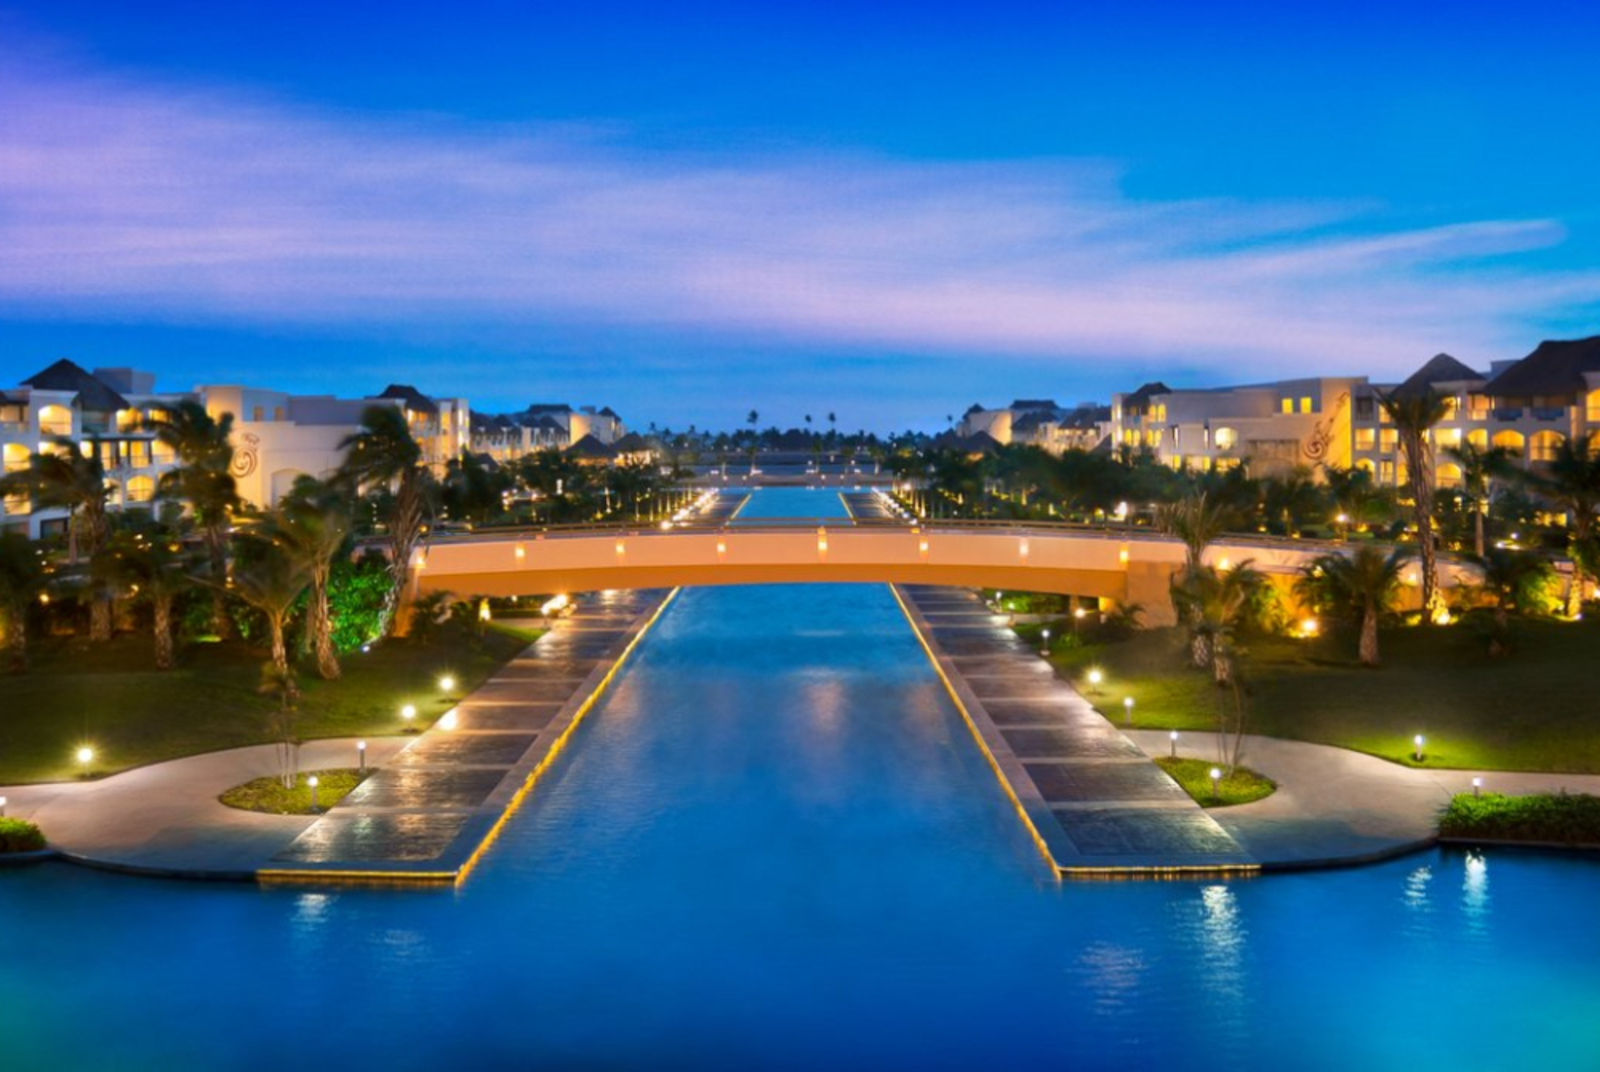 Hard Rock Hotel & Casino is one of the best family resorts in Punta Cana